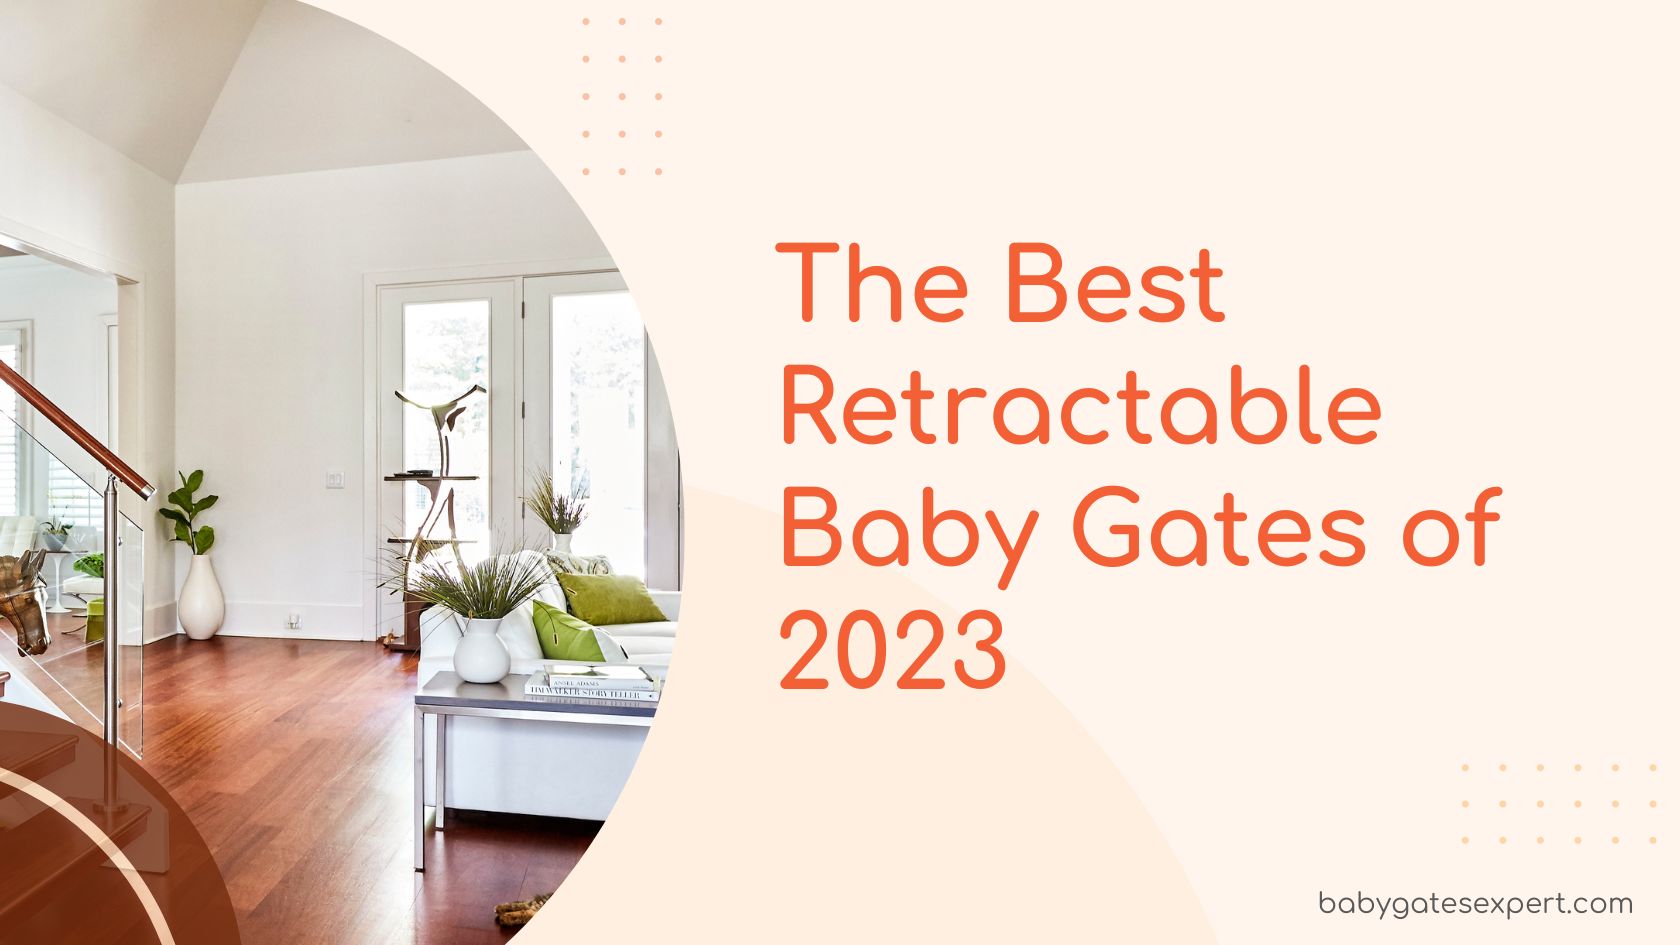 The Best Retractable Baby Gates of 2023